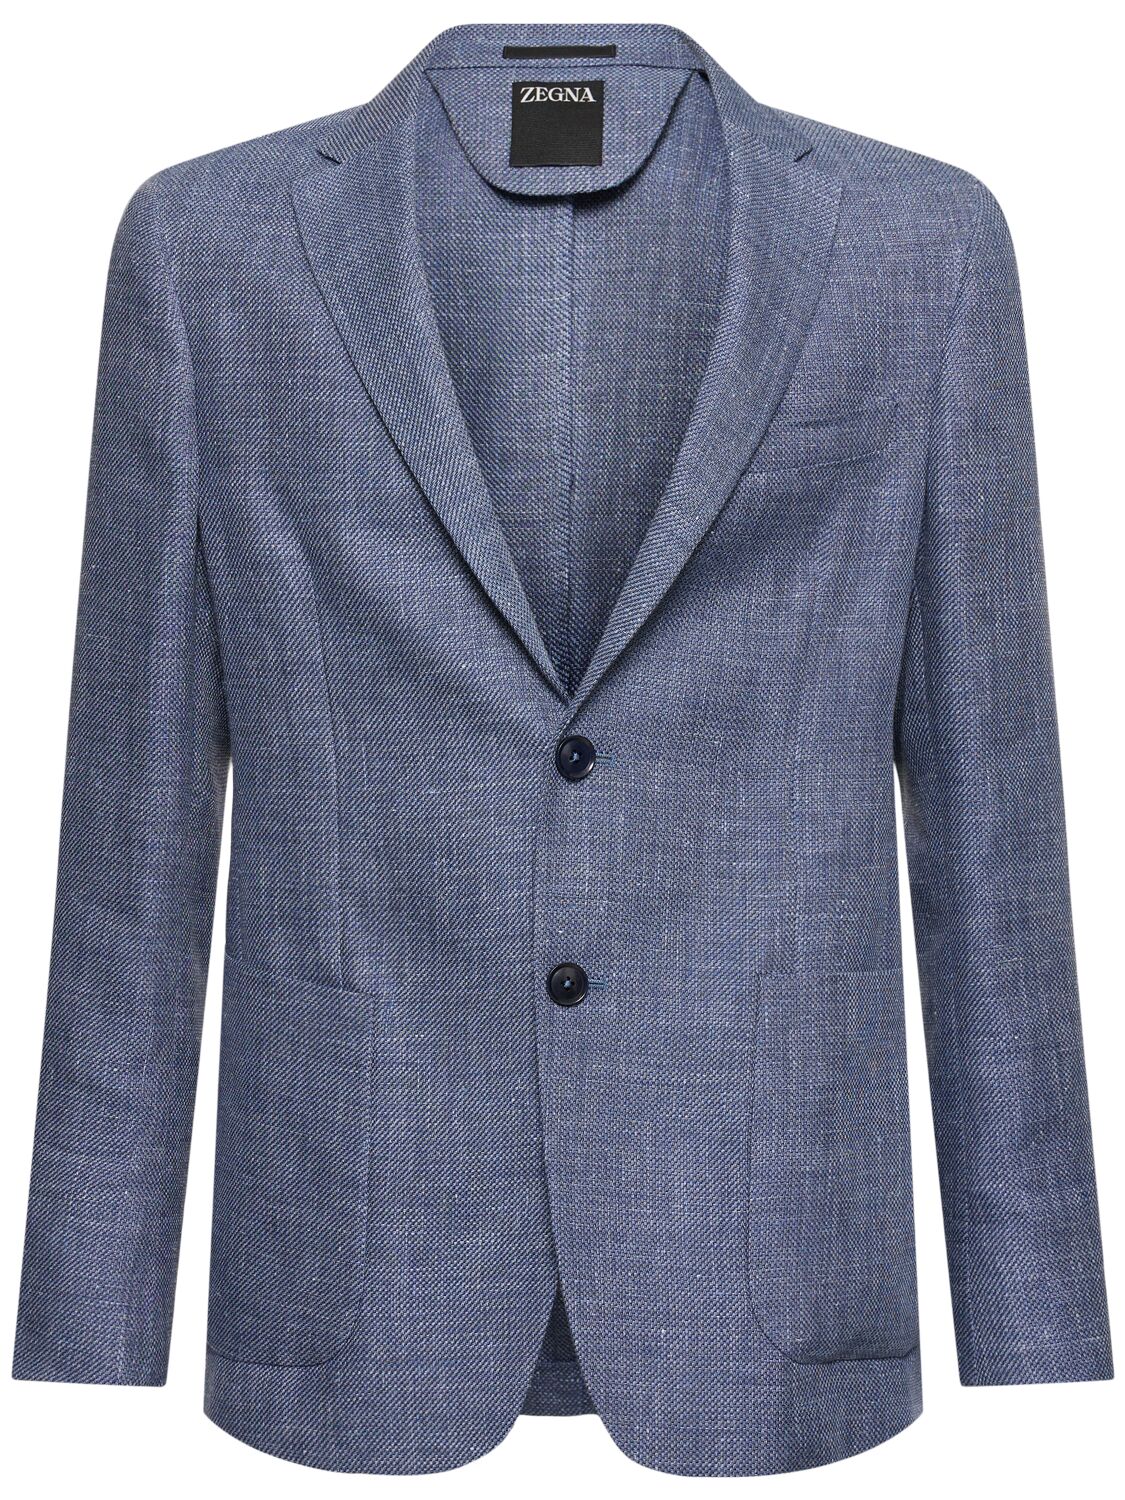 Image of Linen & Cotton Single Breasted Blazer